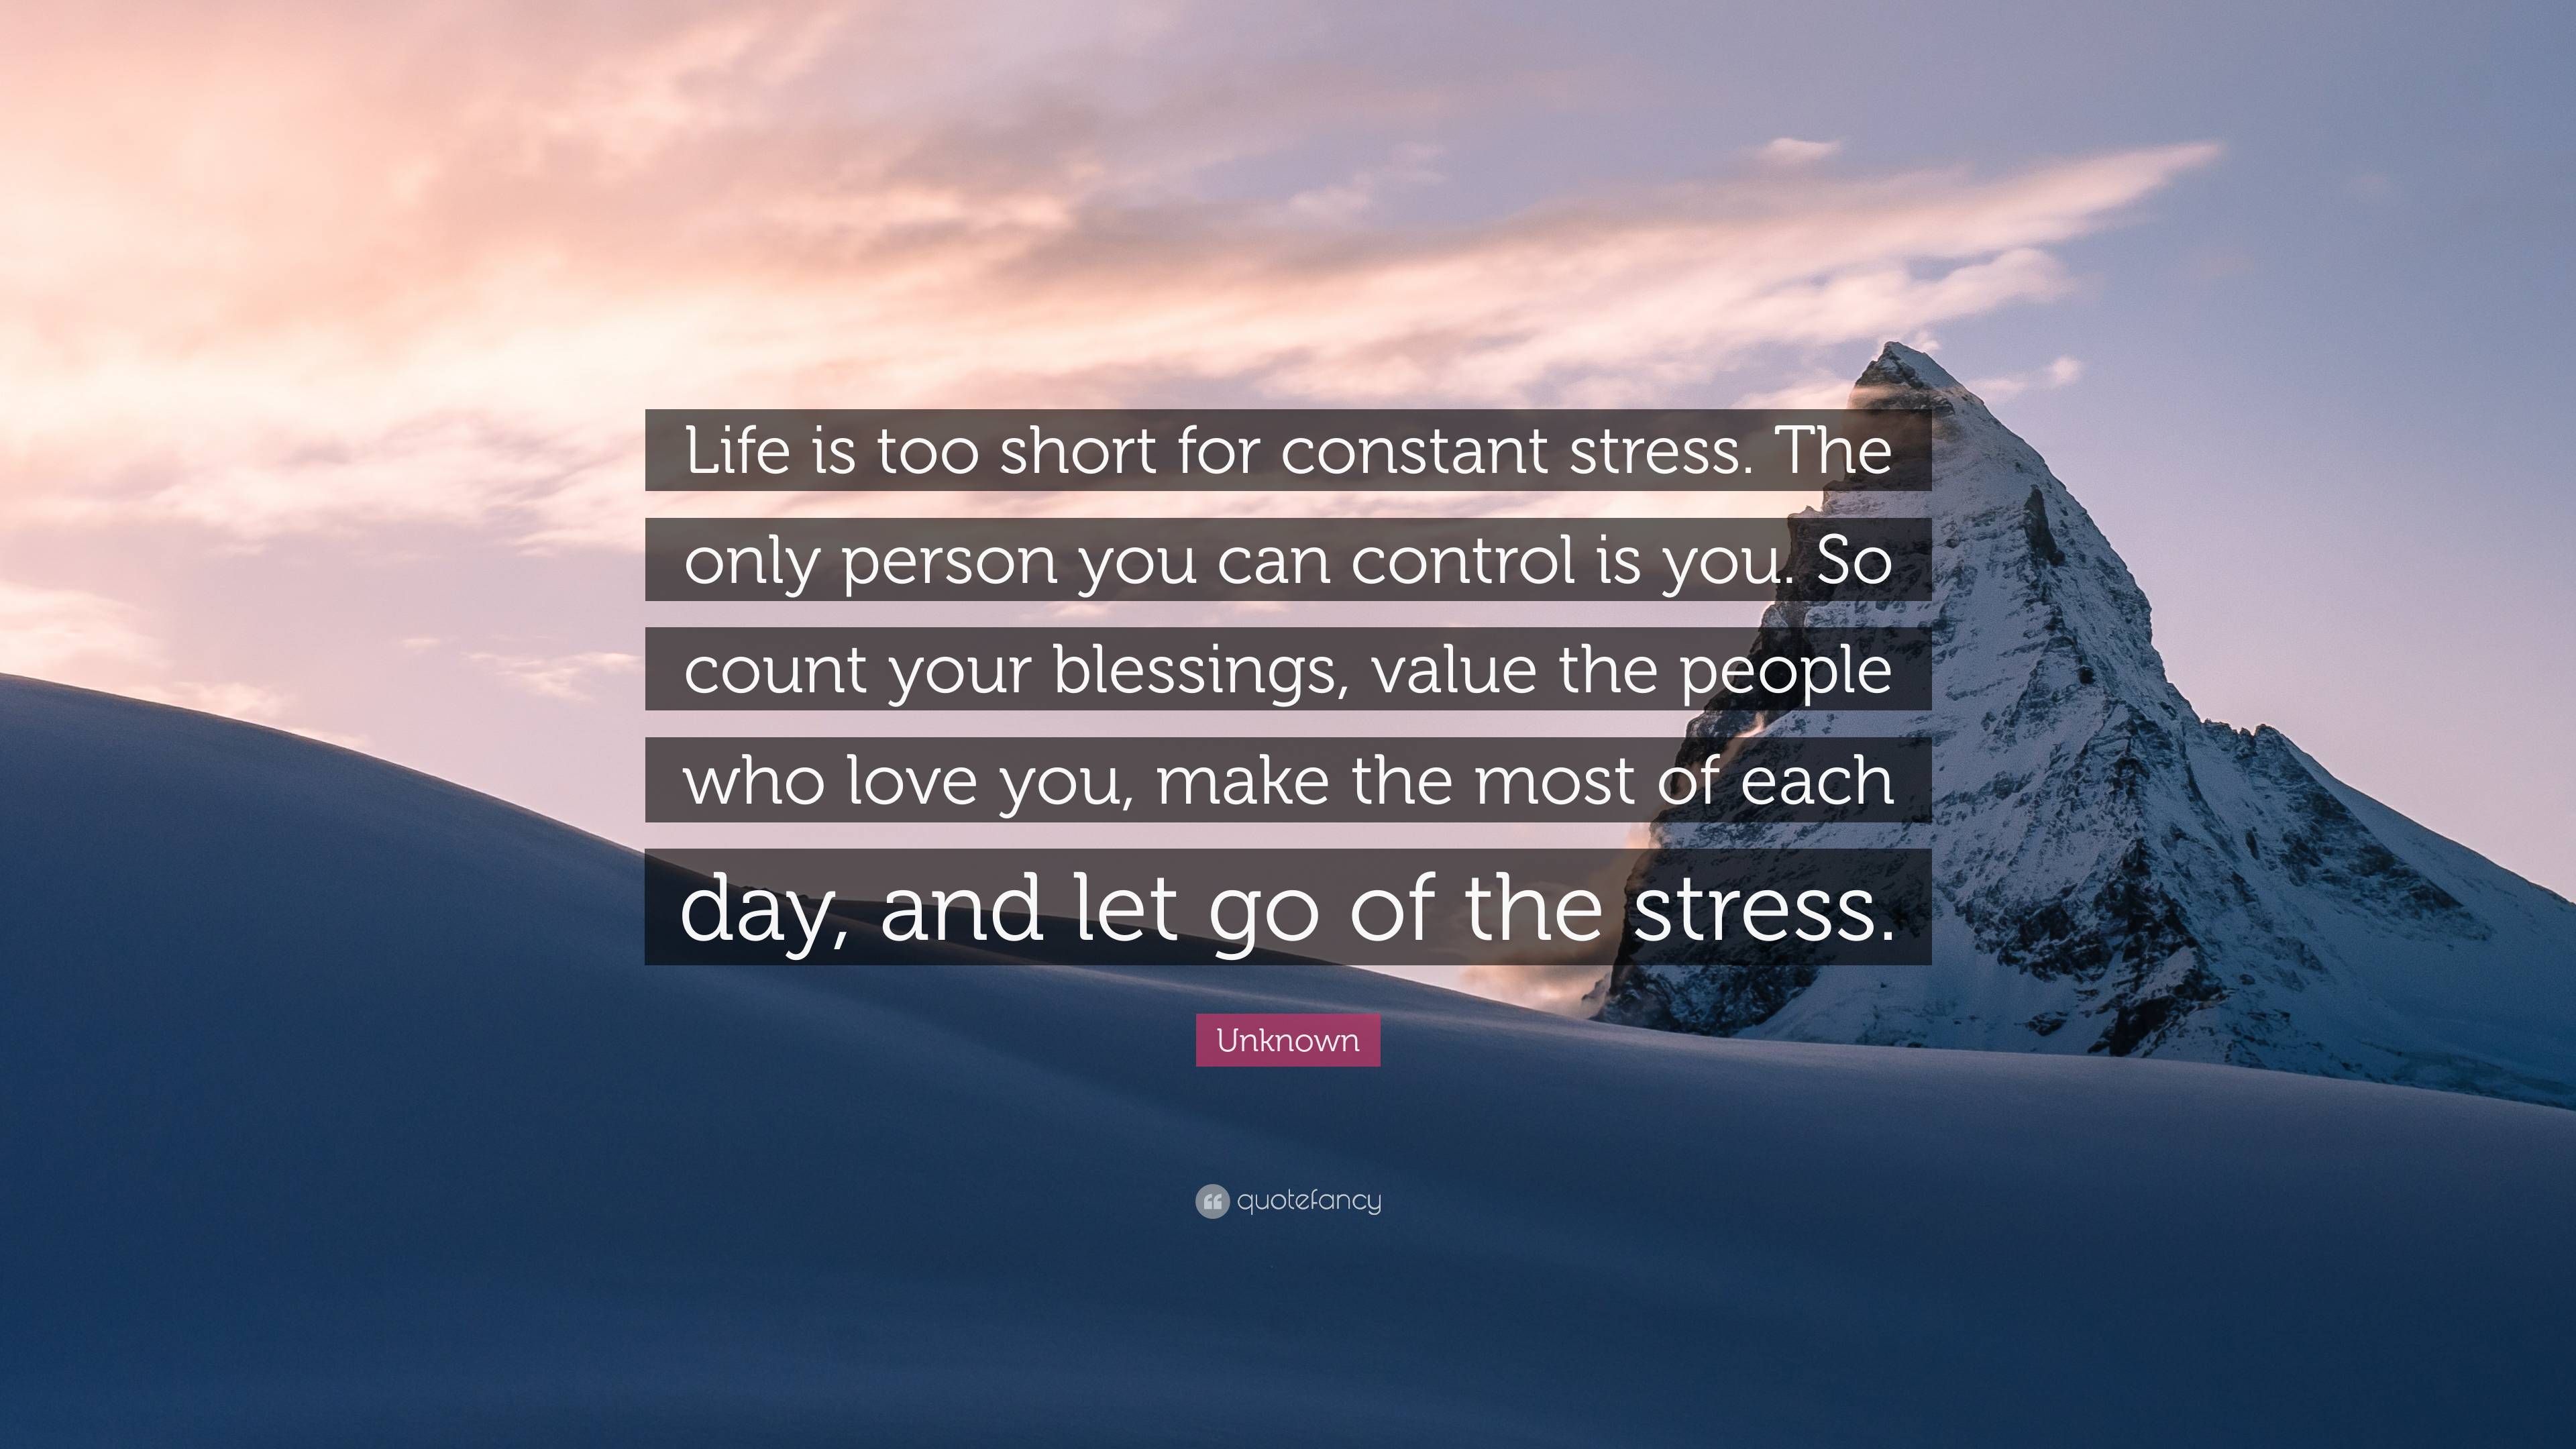 Unknown Quote: “Life is too short for constant stress. The only person you  can control is you. So count your blessings, value the people”